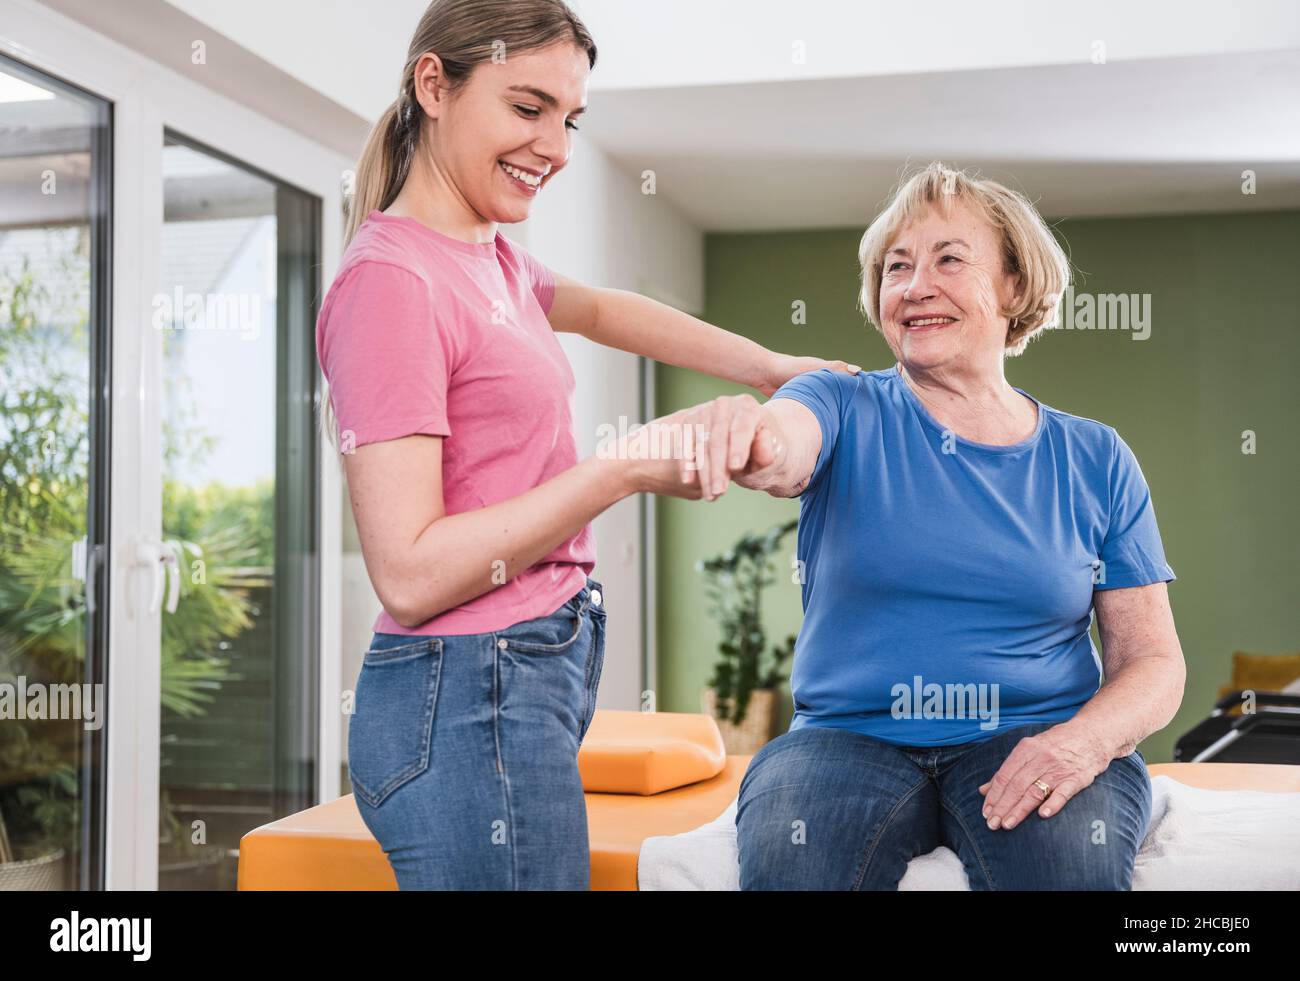 Physical therapist stretching disabled woman's hand at home Stock Photo